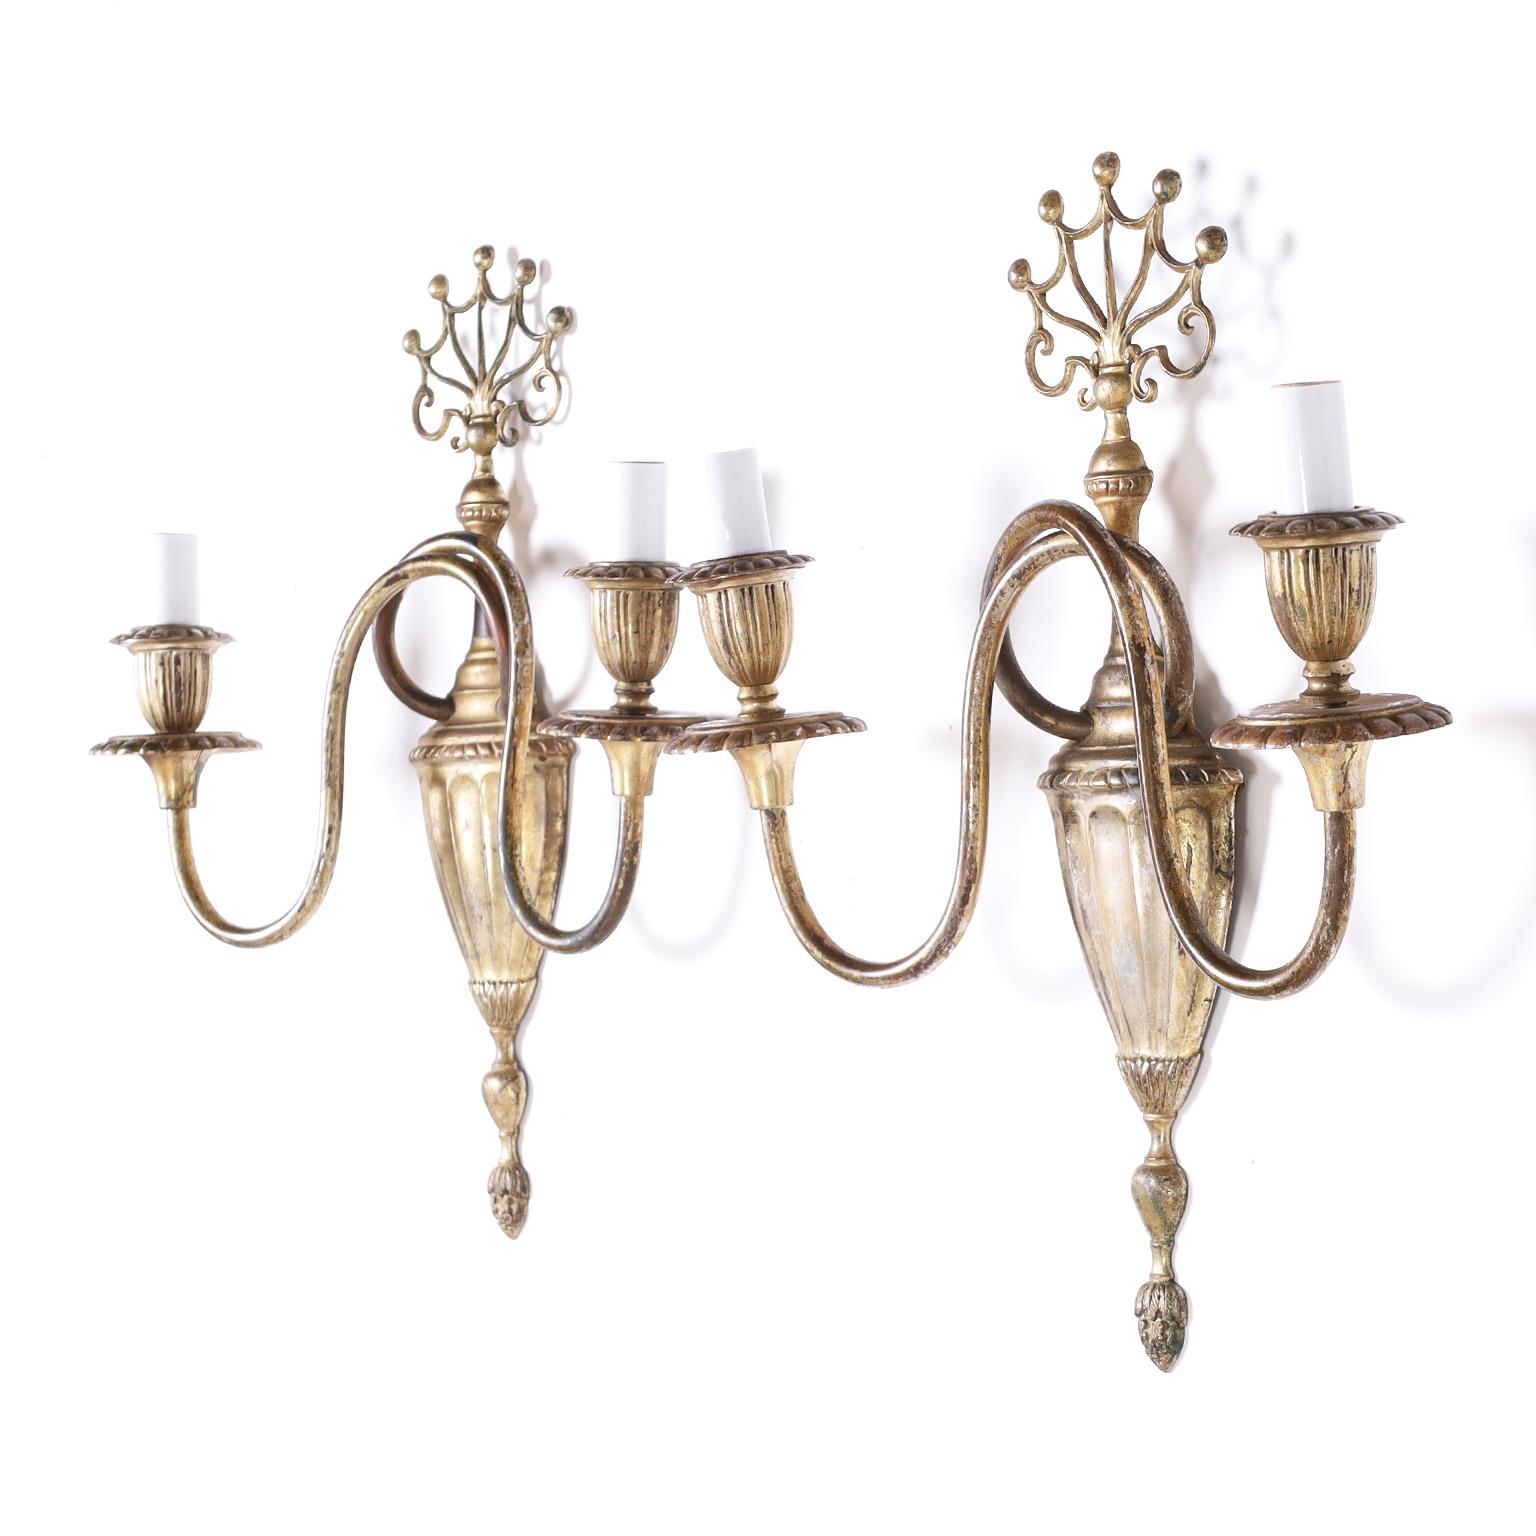 Pair of antique English wall sconces crafted in metal with a worn silver plate finish over a classic form having a crown, graceful looping arms, fluted urn, and an acorn finial at the bottom.